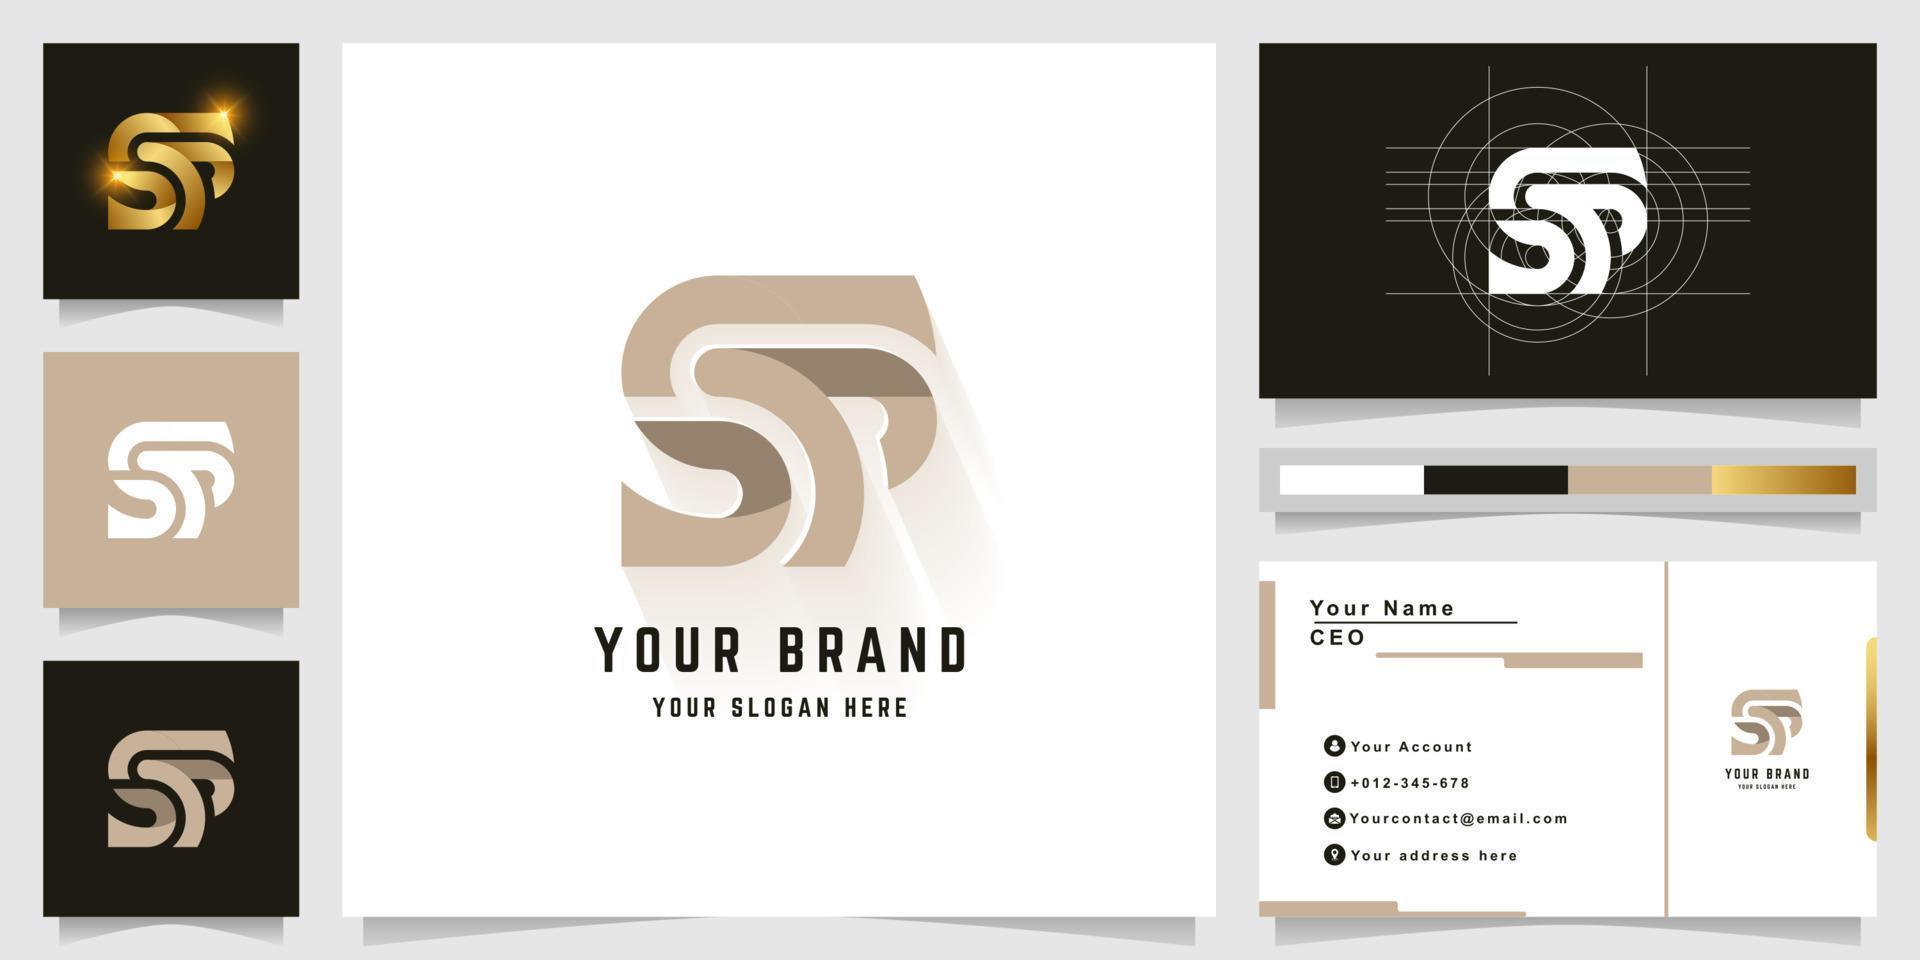 Letter SP or SS monogram logo with business card design vector